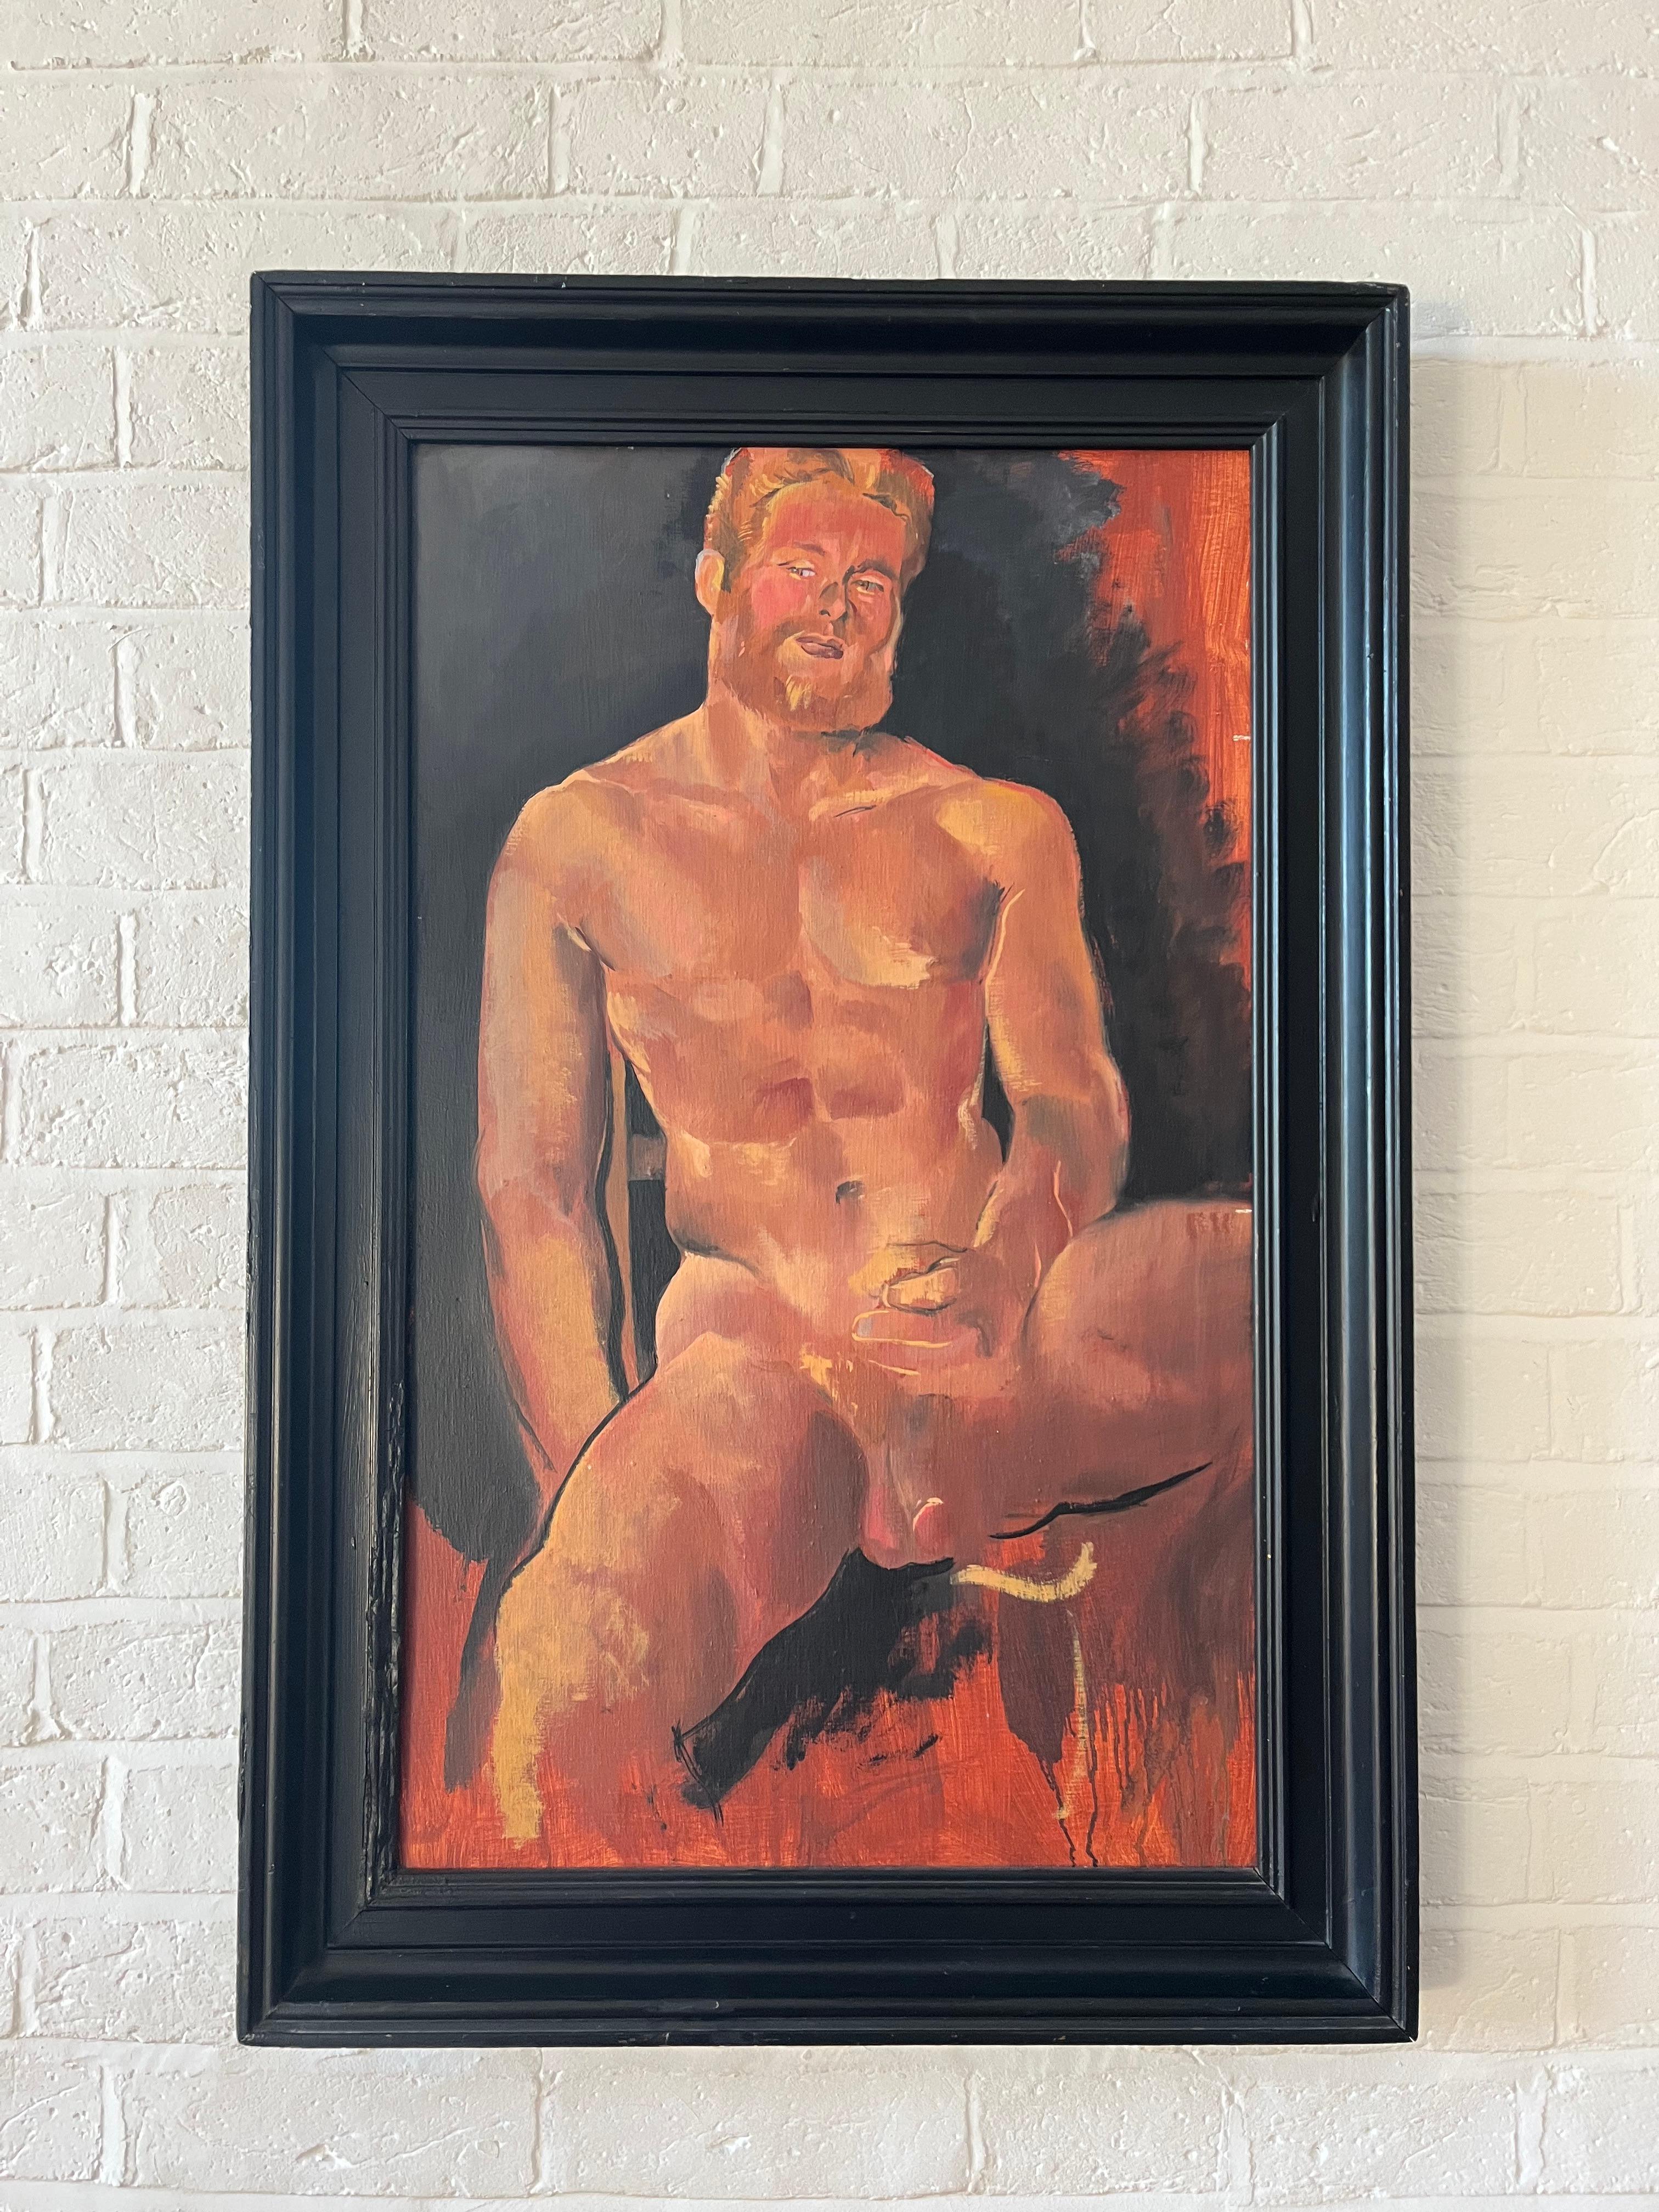 1980s Erotic nude male portrait of artist's lover, Iconic piece from gay history For Sale 7